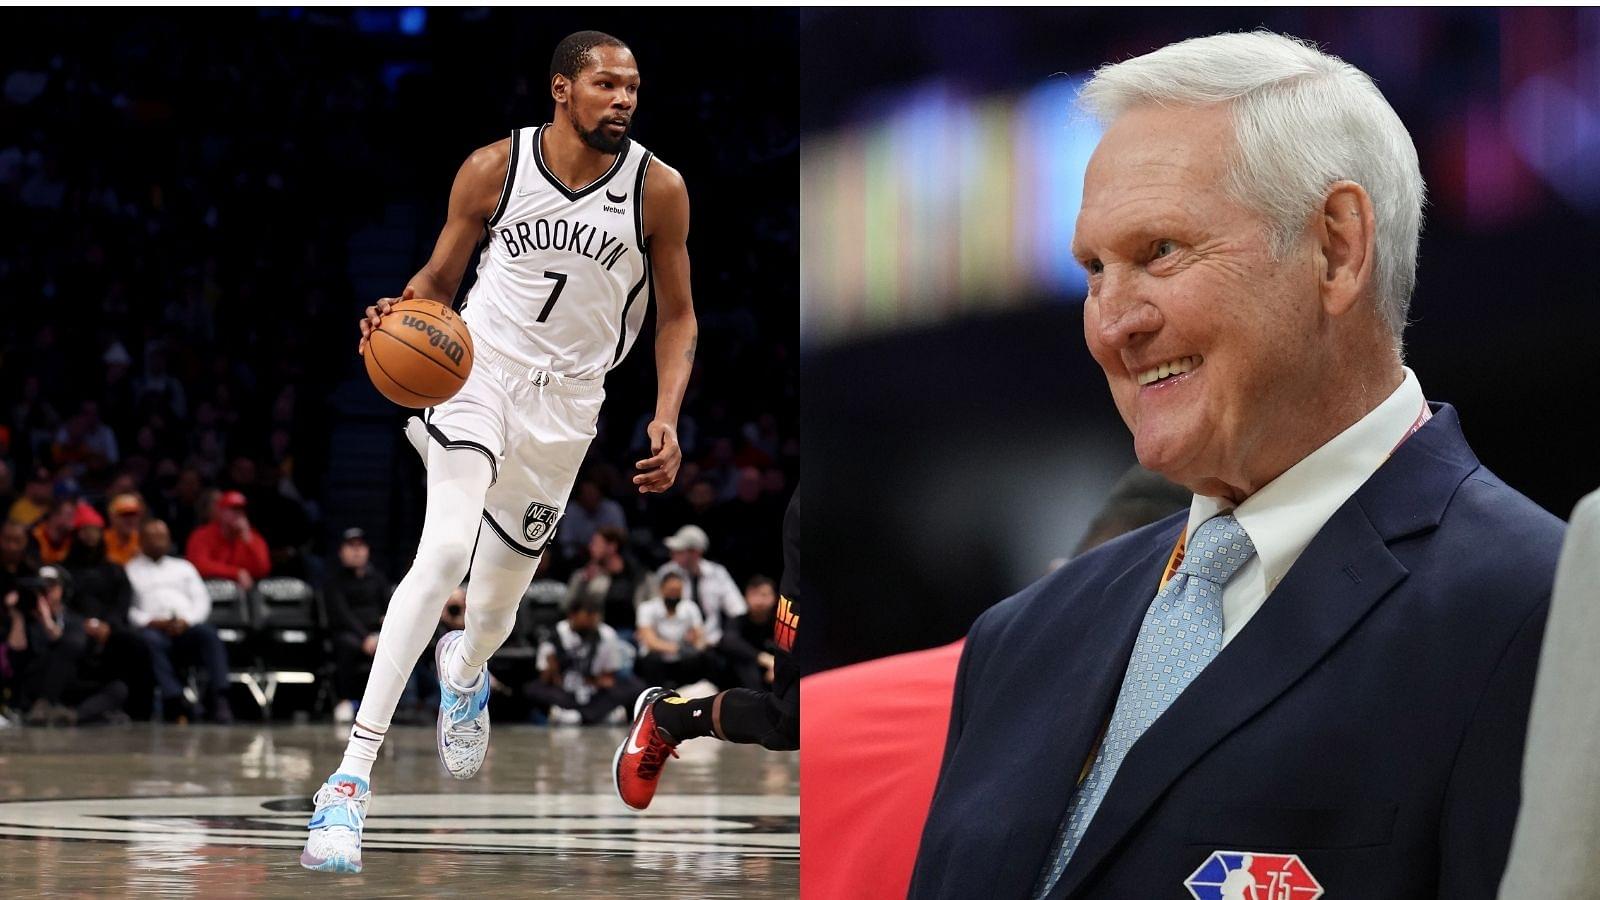 "Kevin Durant passes Jerry West on the all-time scoring list": The Slim Reaper takes the 22nd spot on top scorers list while leading Nets to a victory against Utah Jazz